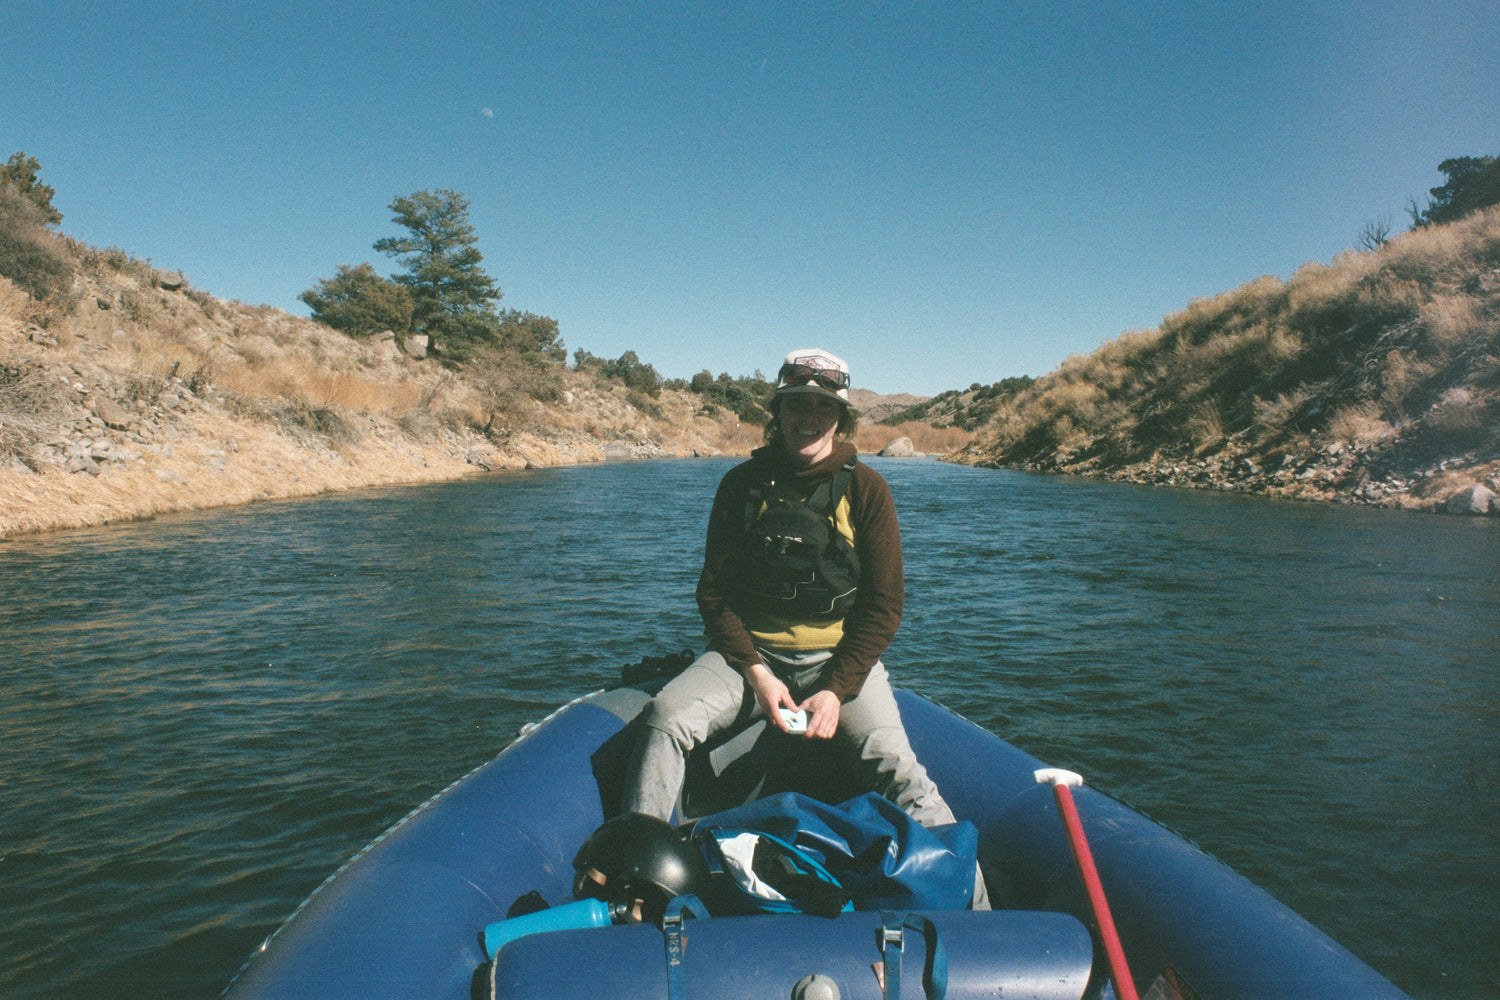 Jodi, owner of River Station Gear whitewater rafting down the Arkansas River.